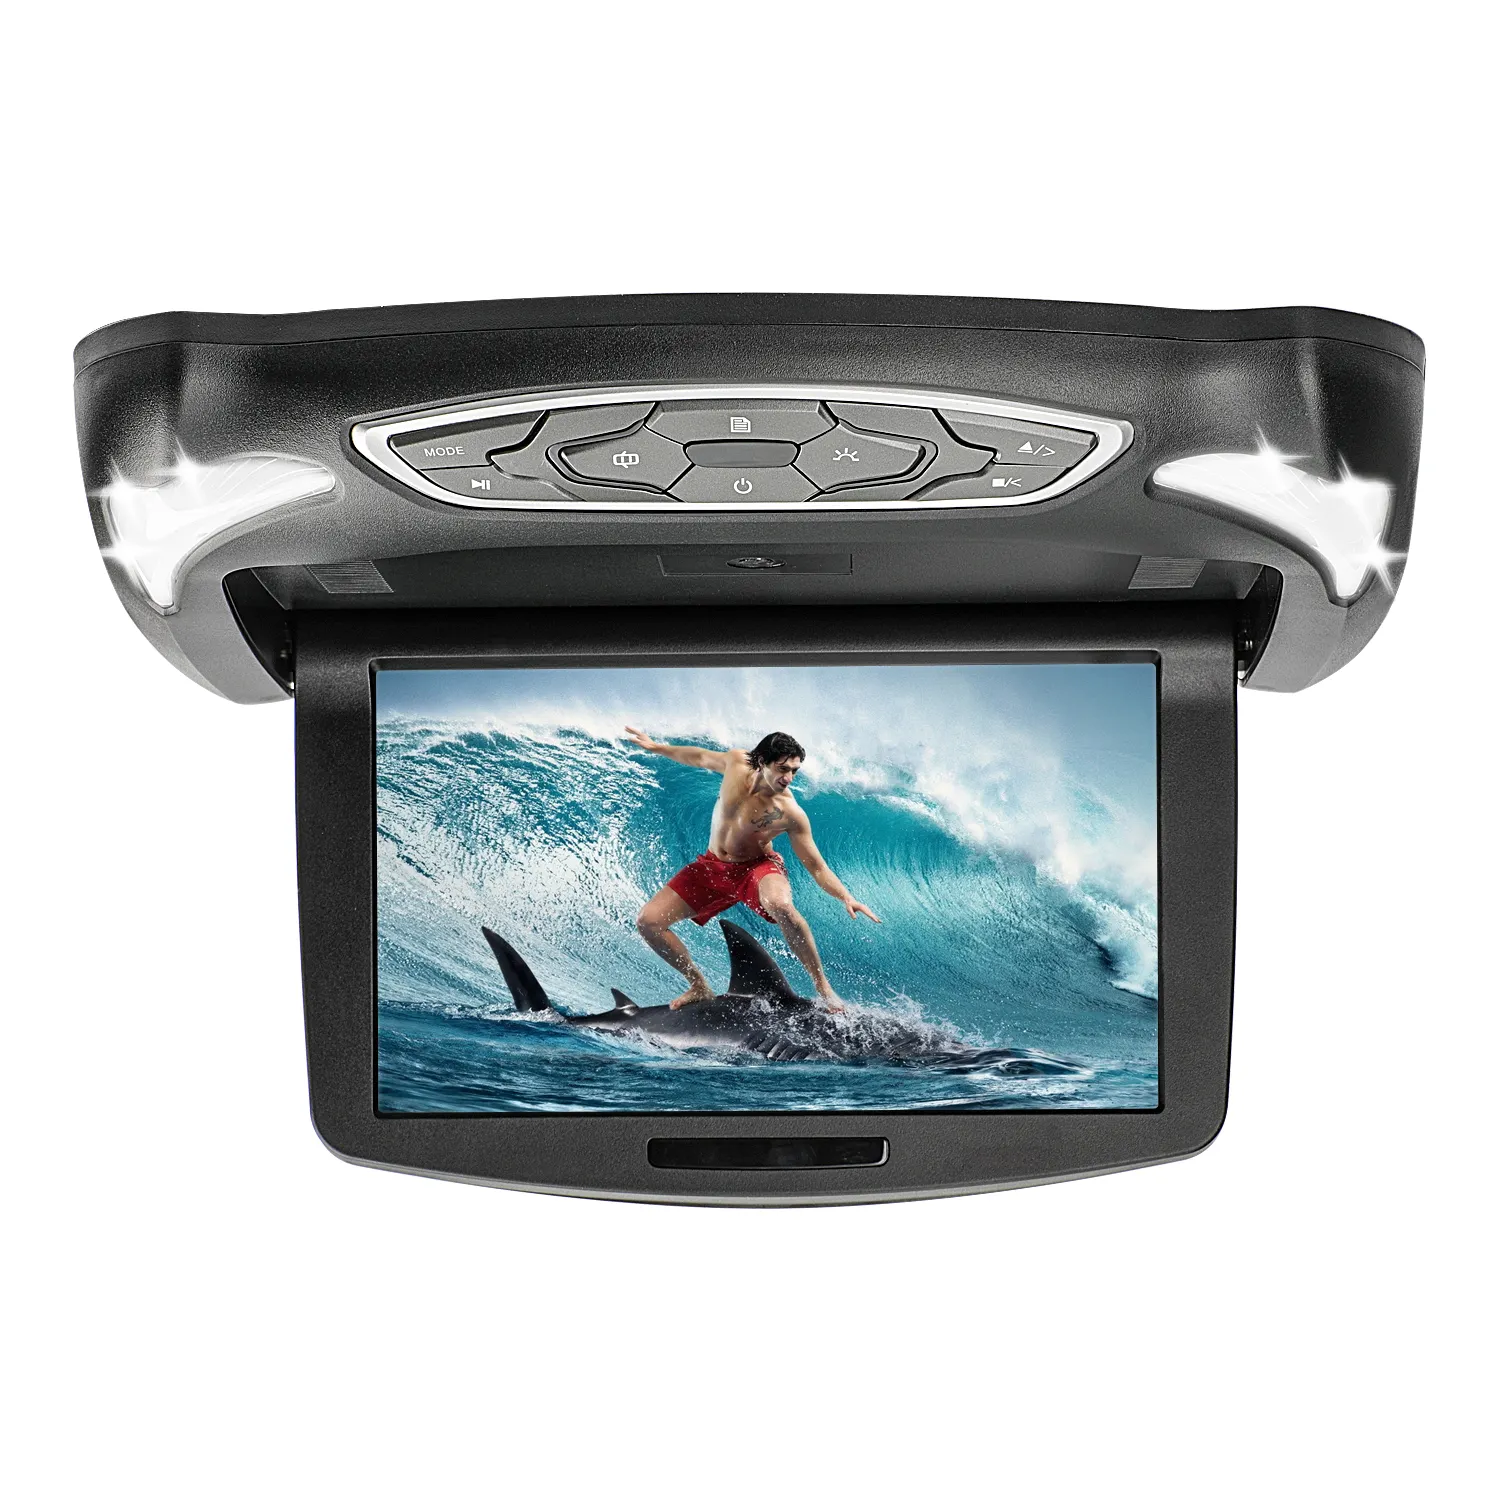 CL-101RD Car DVD Suction eine Top 10.1 zoll Car Roof montiert DVD player monitor With SD/USB/CD Player